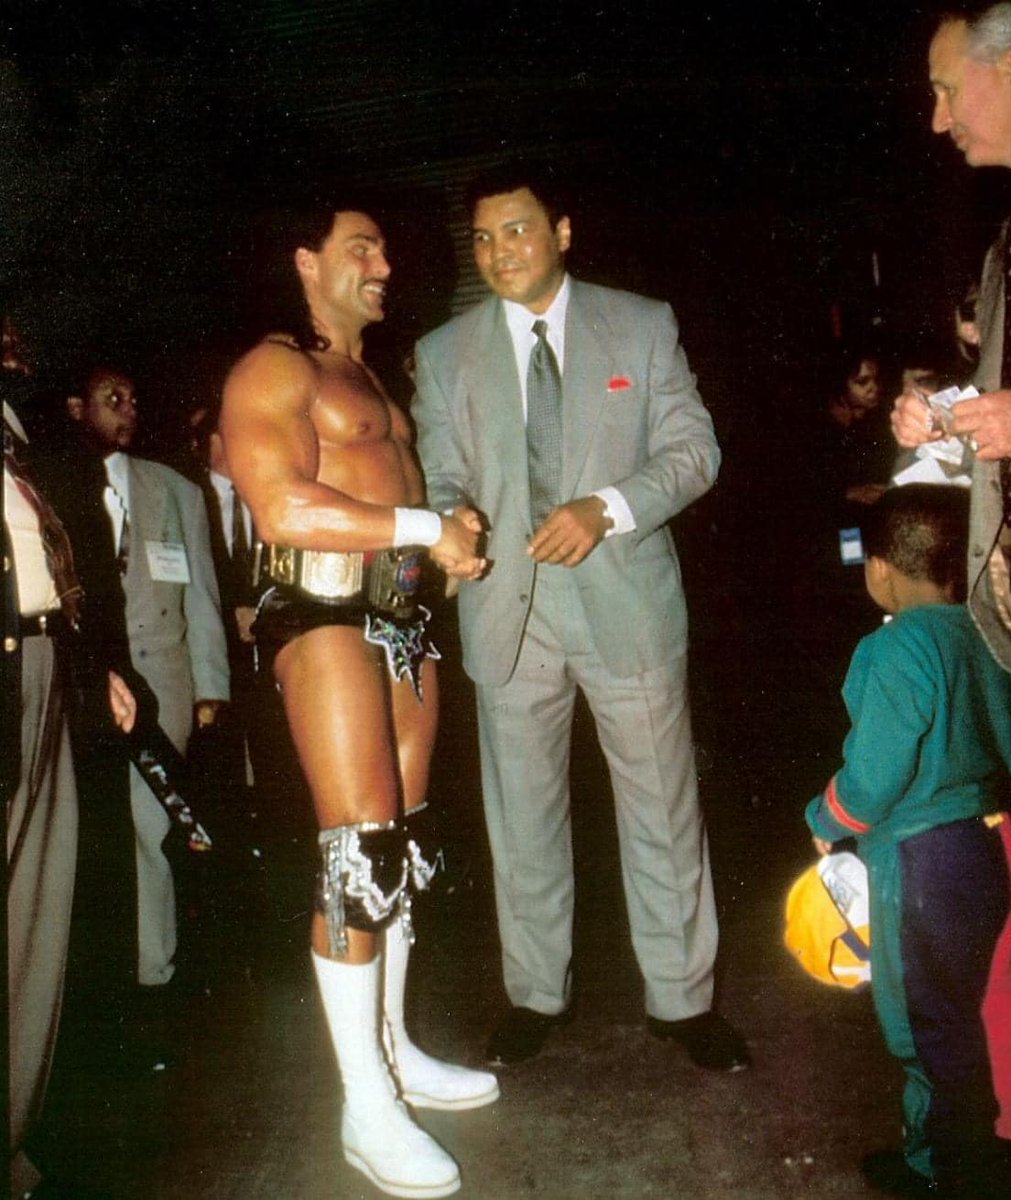 A day I will never forget.
Throughout my career I had the opportunity to meet many pro athletes and celebrities. There was no one I enjoyed meeting more than 'The Greatest' Muhammad Ali. These pictures were taken before my PPV match on October 23, 1994 where I was defending my…